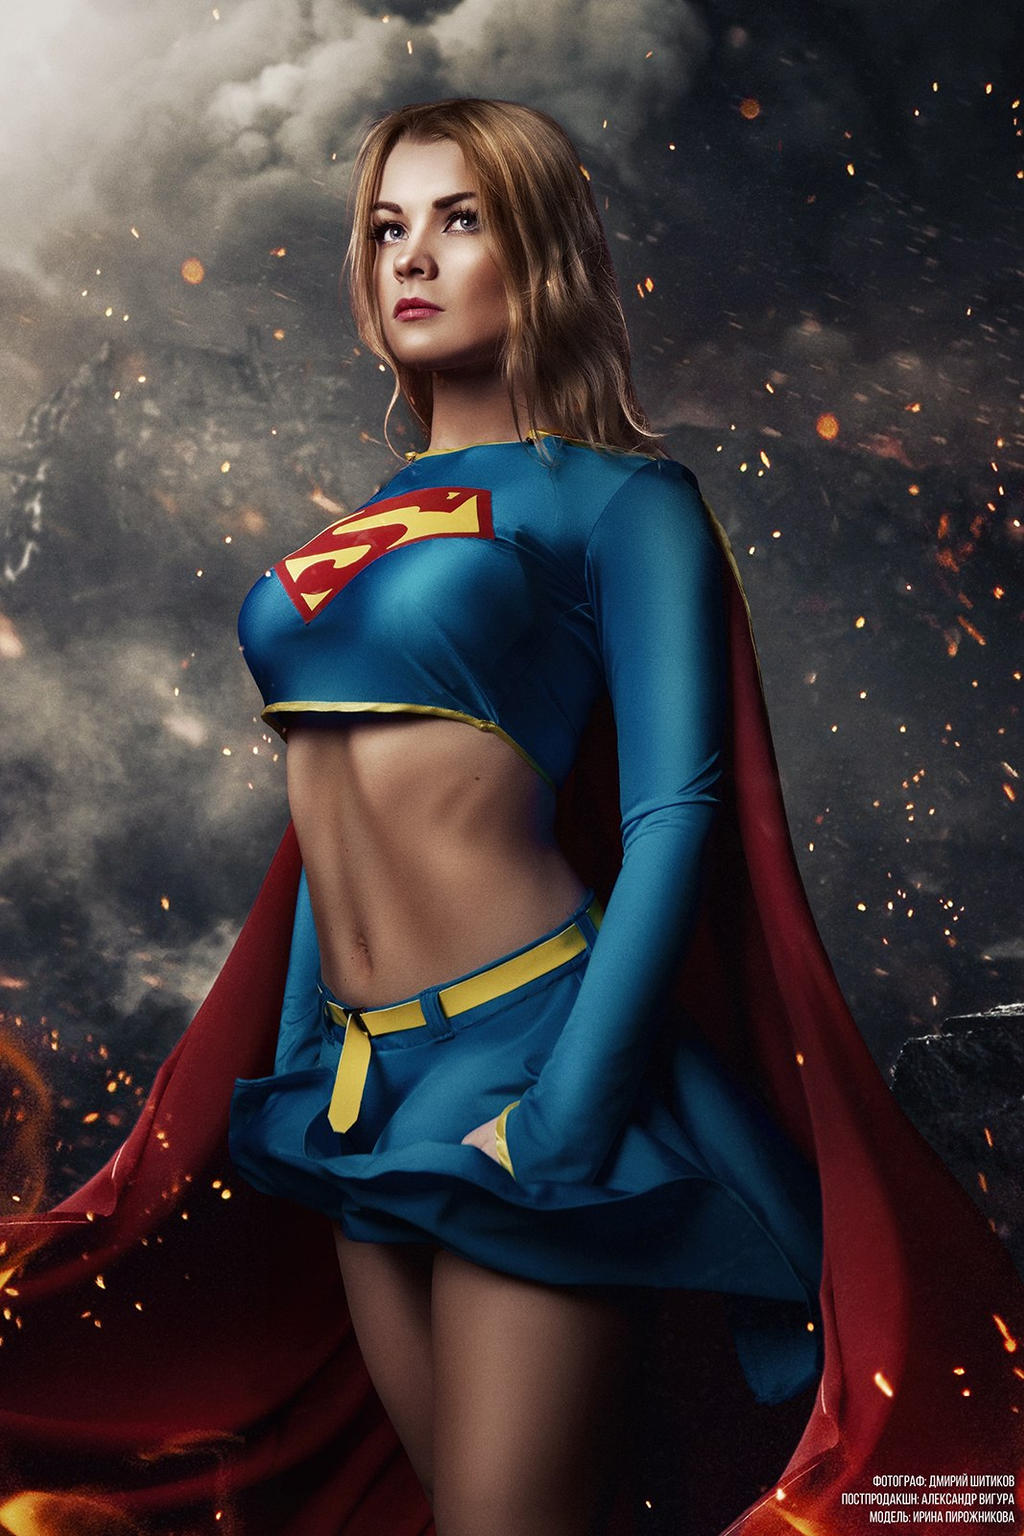 and redg on smutty, powergirl vs fan rasti, sexy supergirl toon andre ajiba...